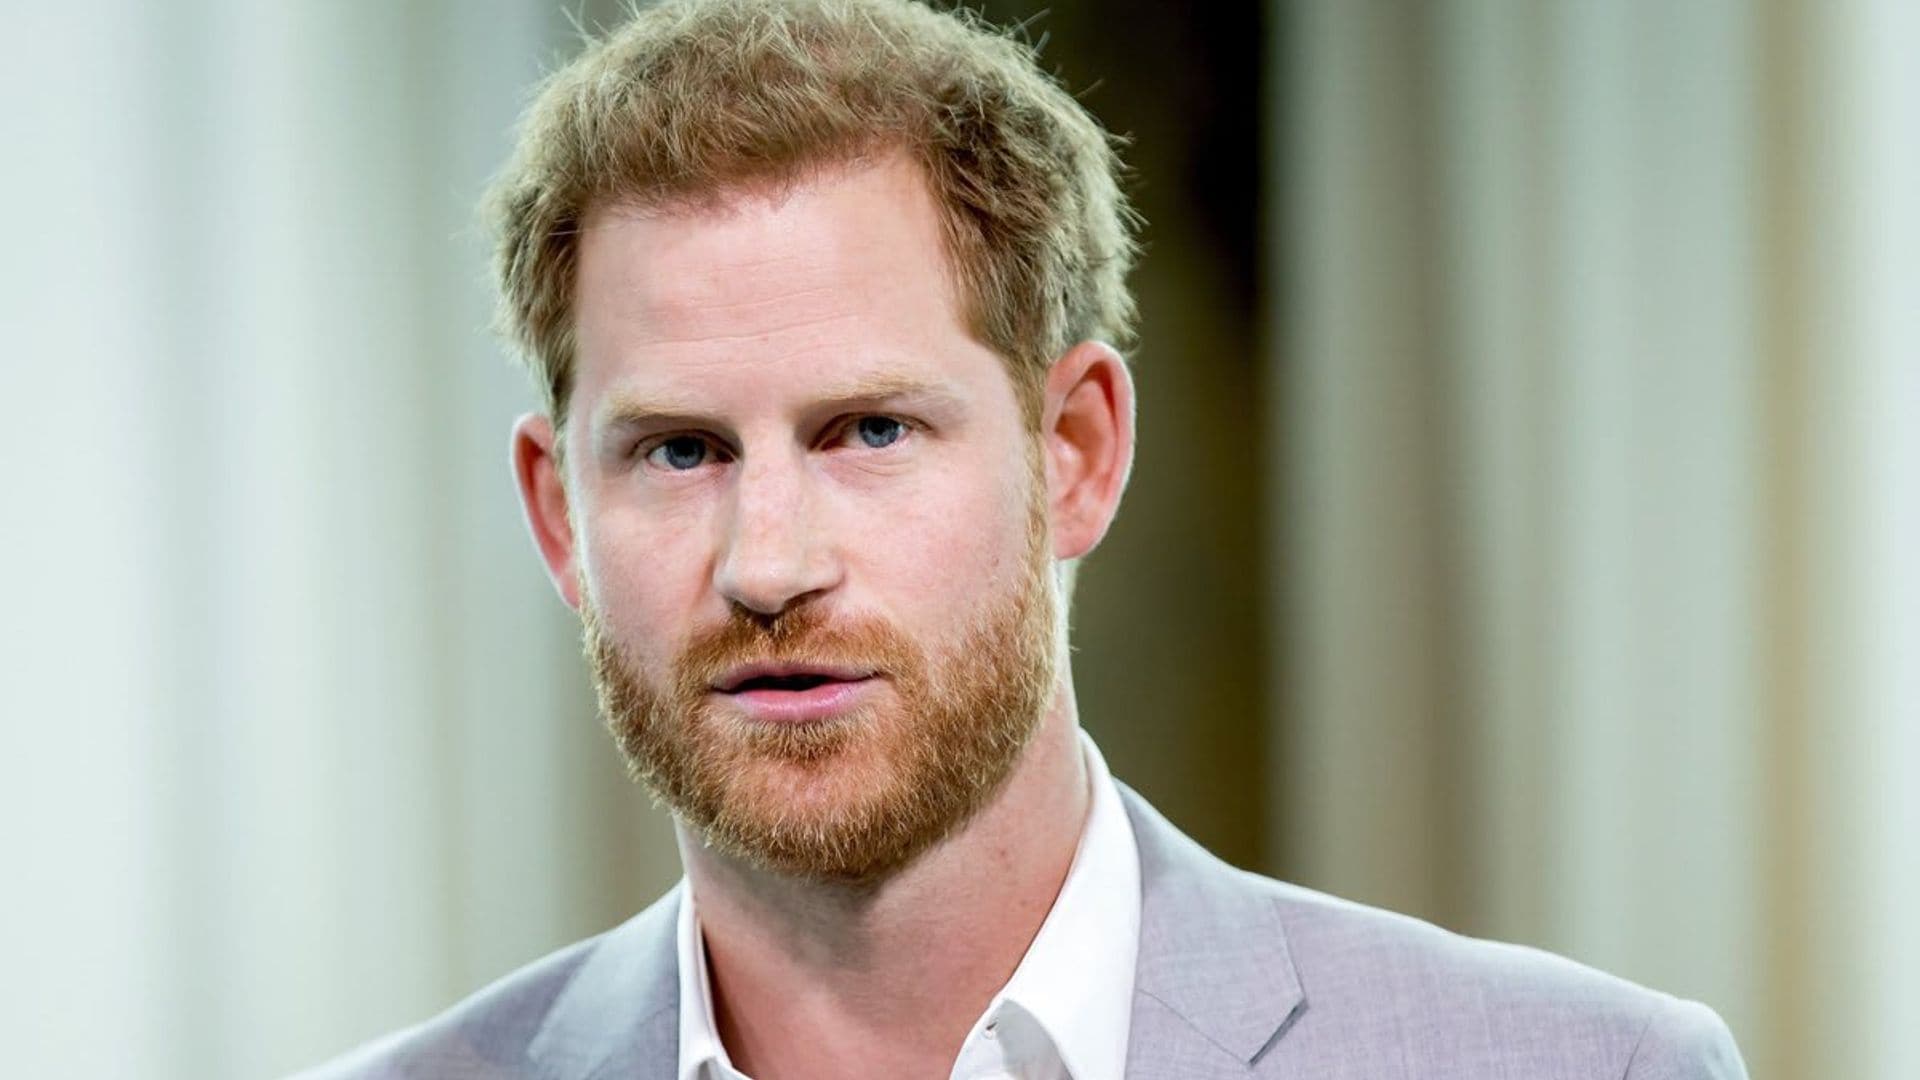 Prince Harry to return to the UK less than one month after daughter Lili’s birth